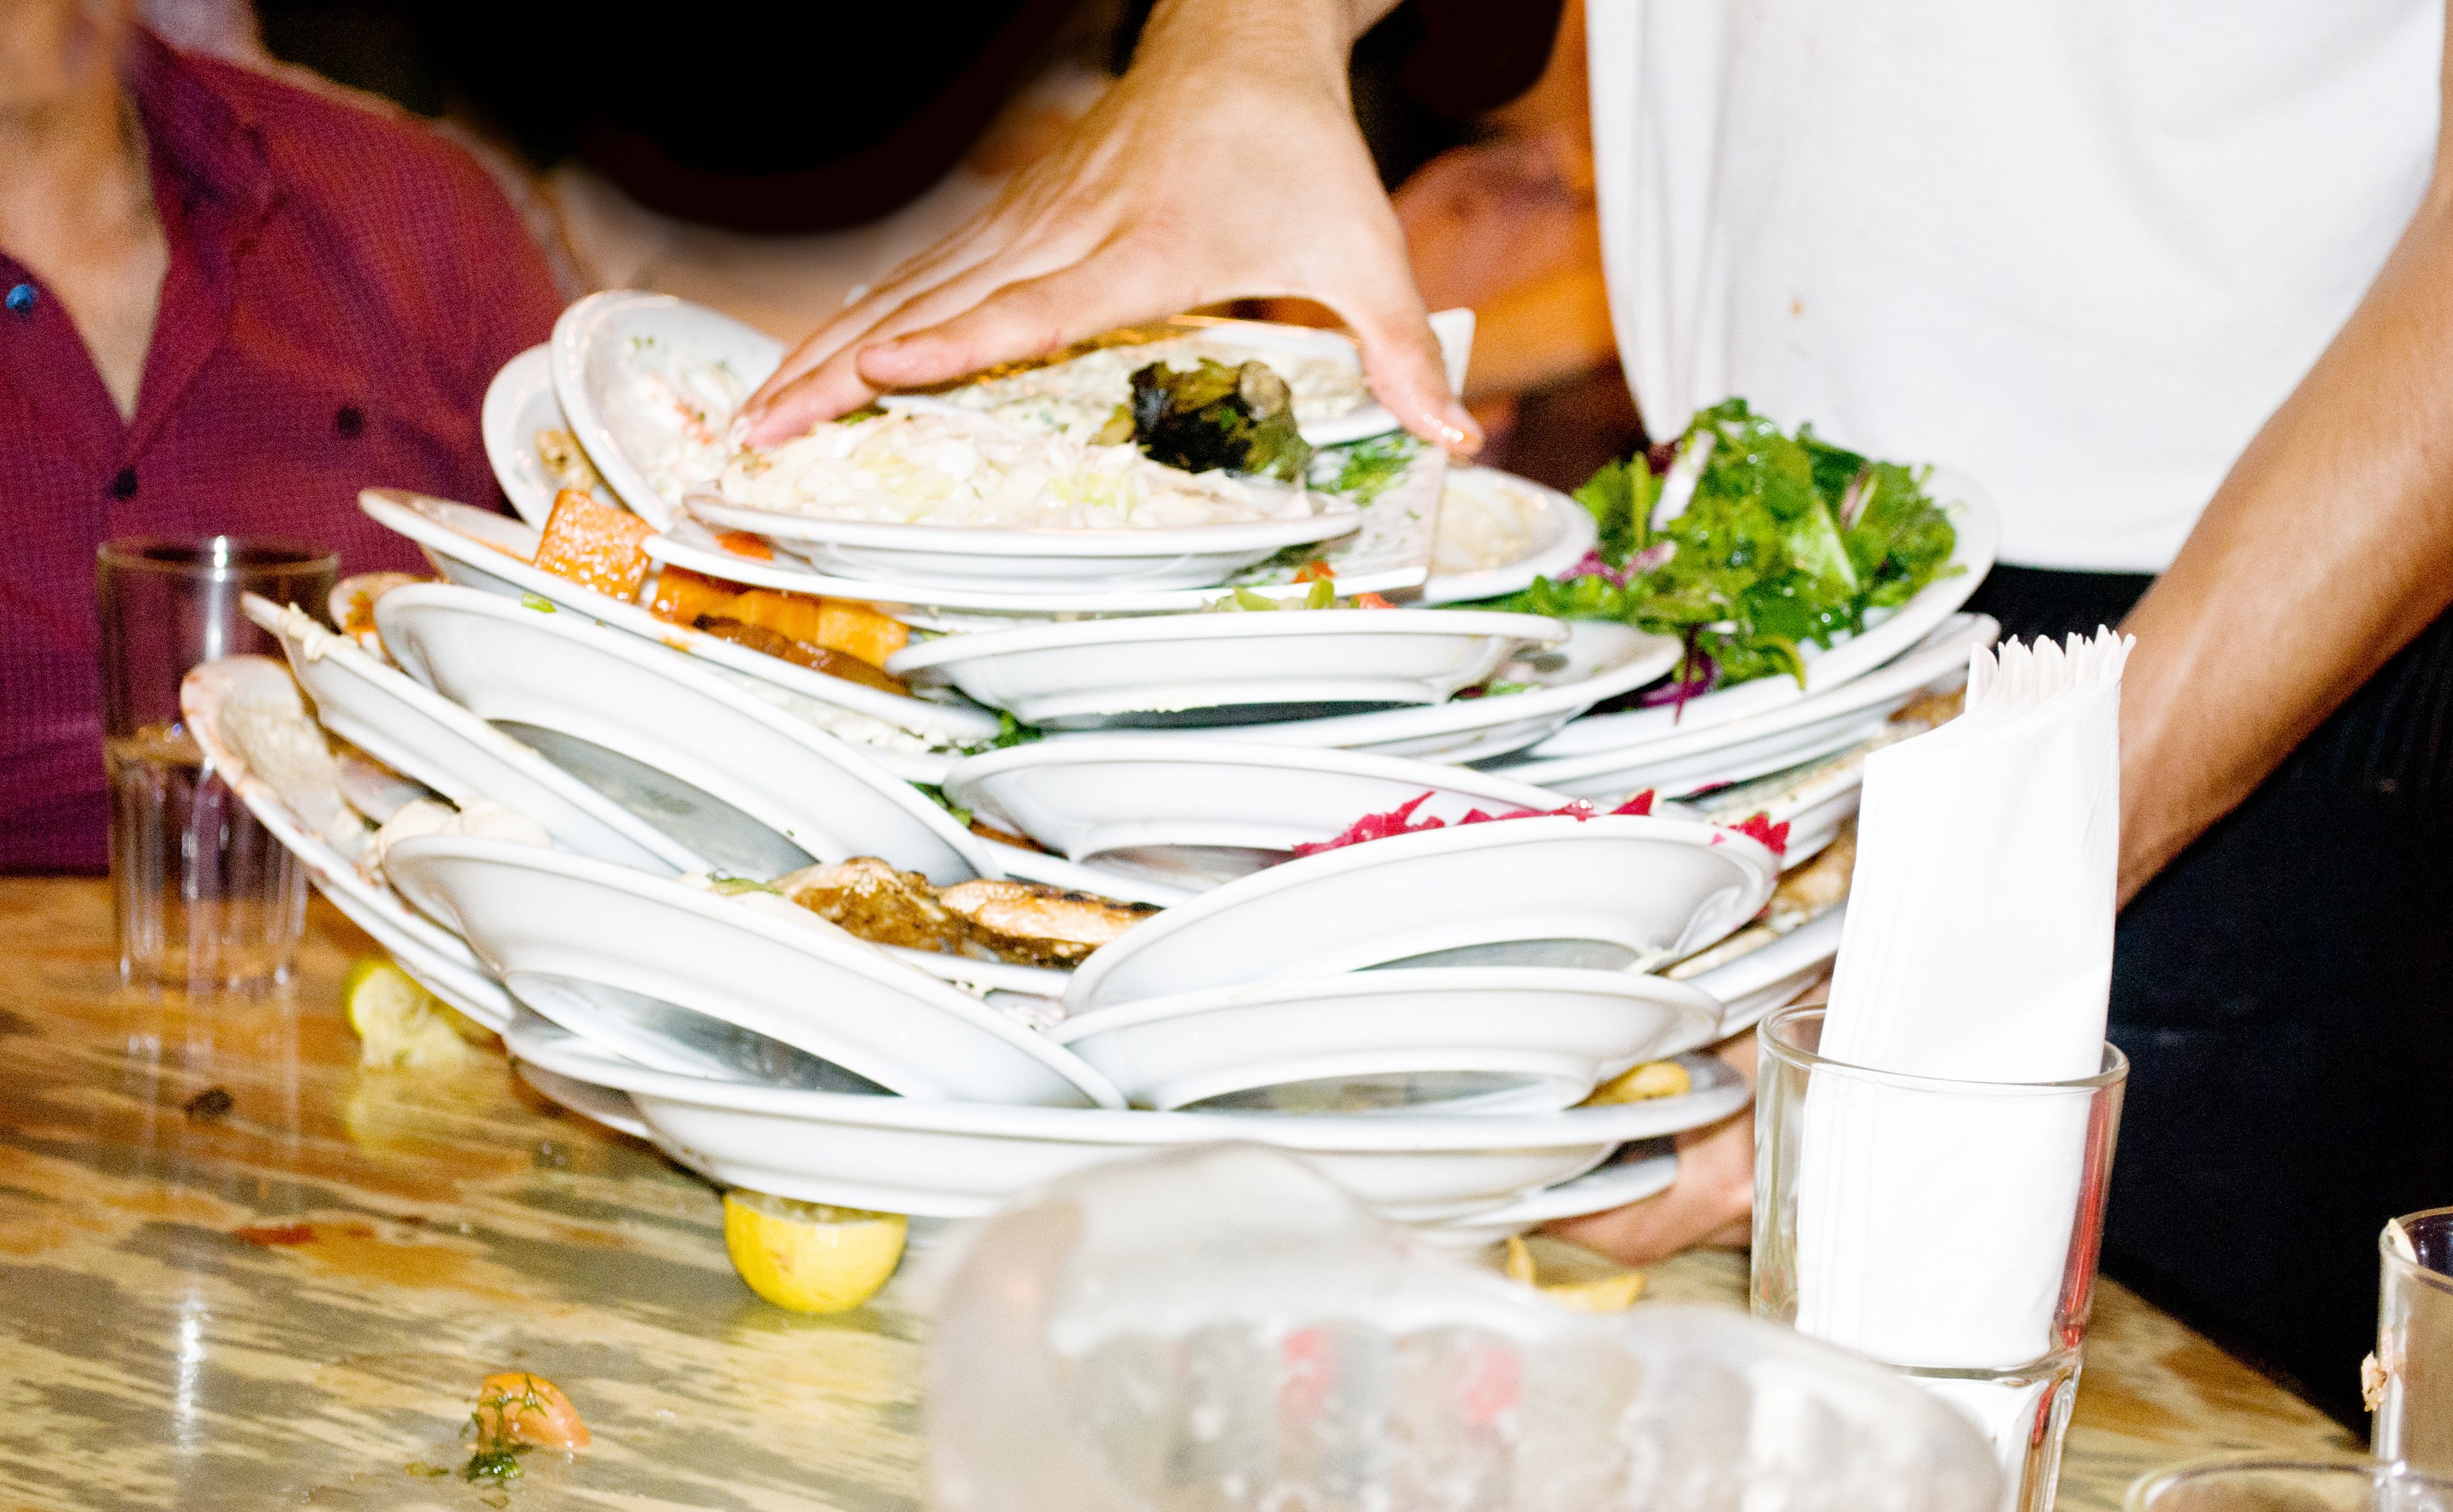 Waiter piles dishes on half-eaten food instead of learning how to reduce waste in the kitchen